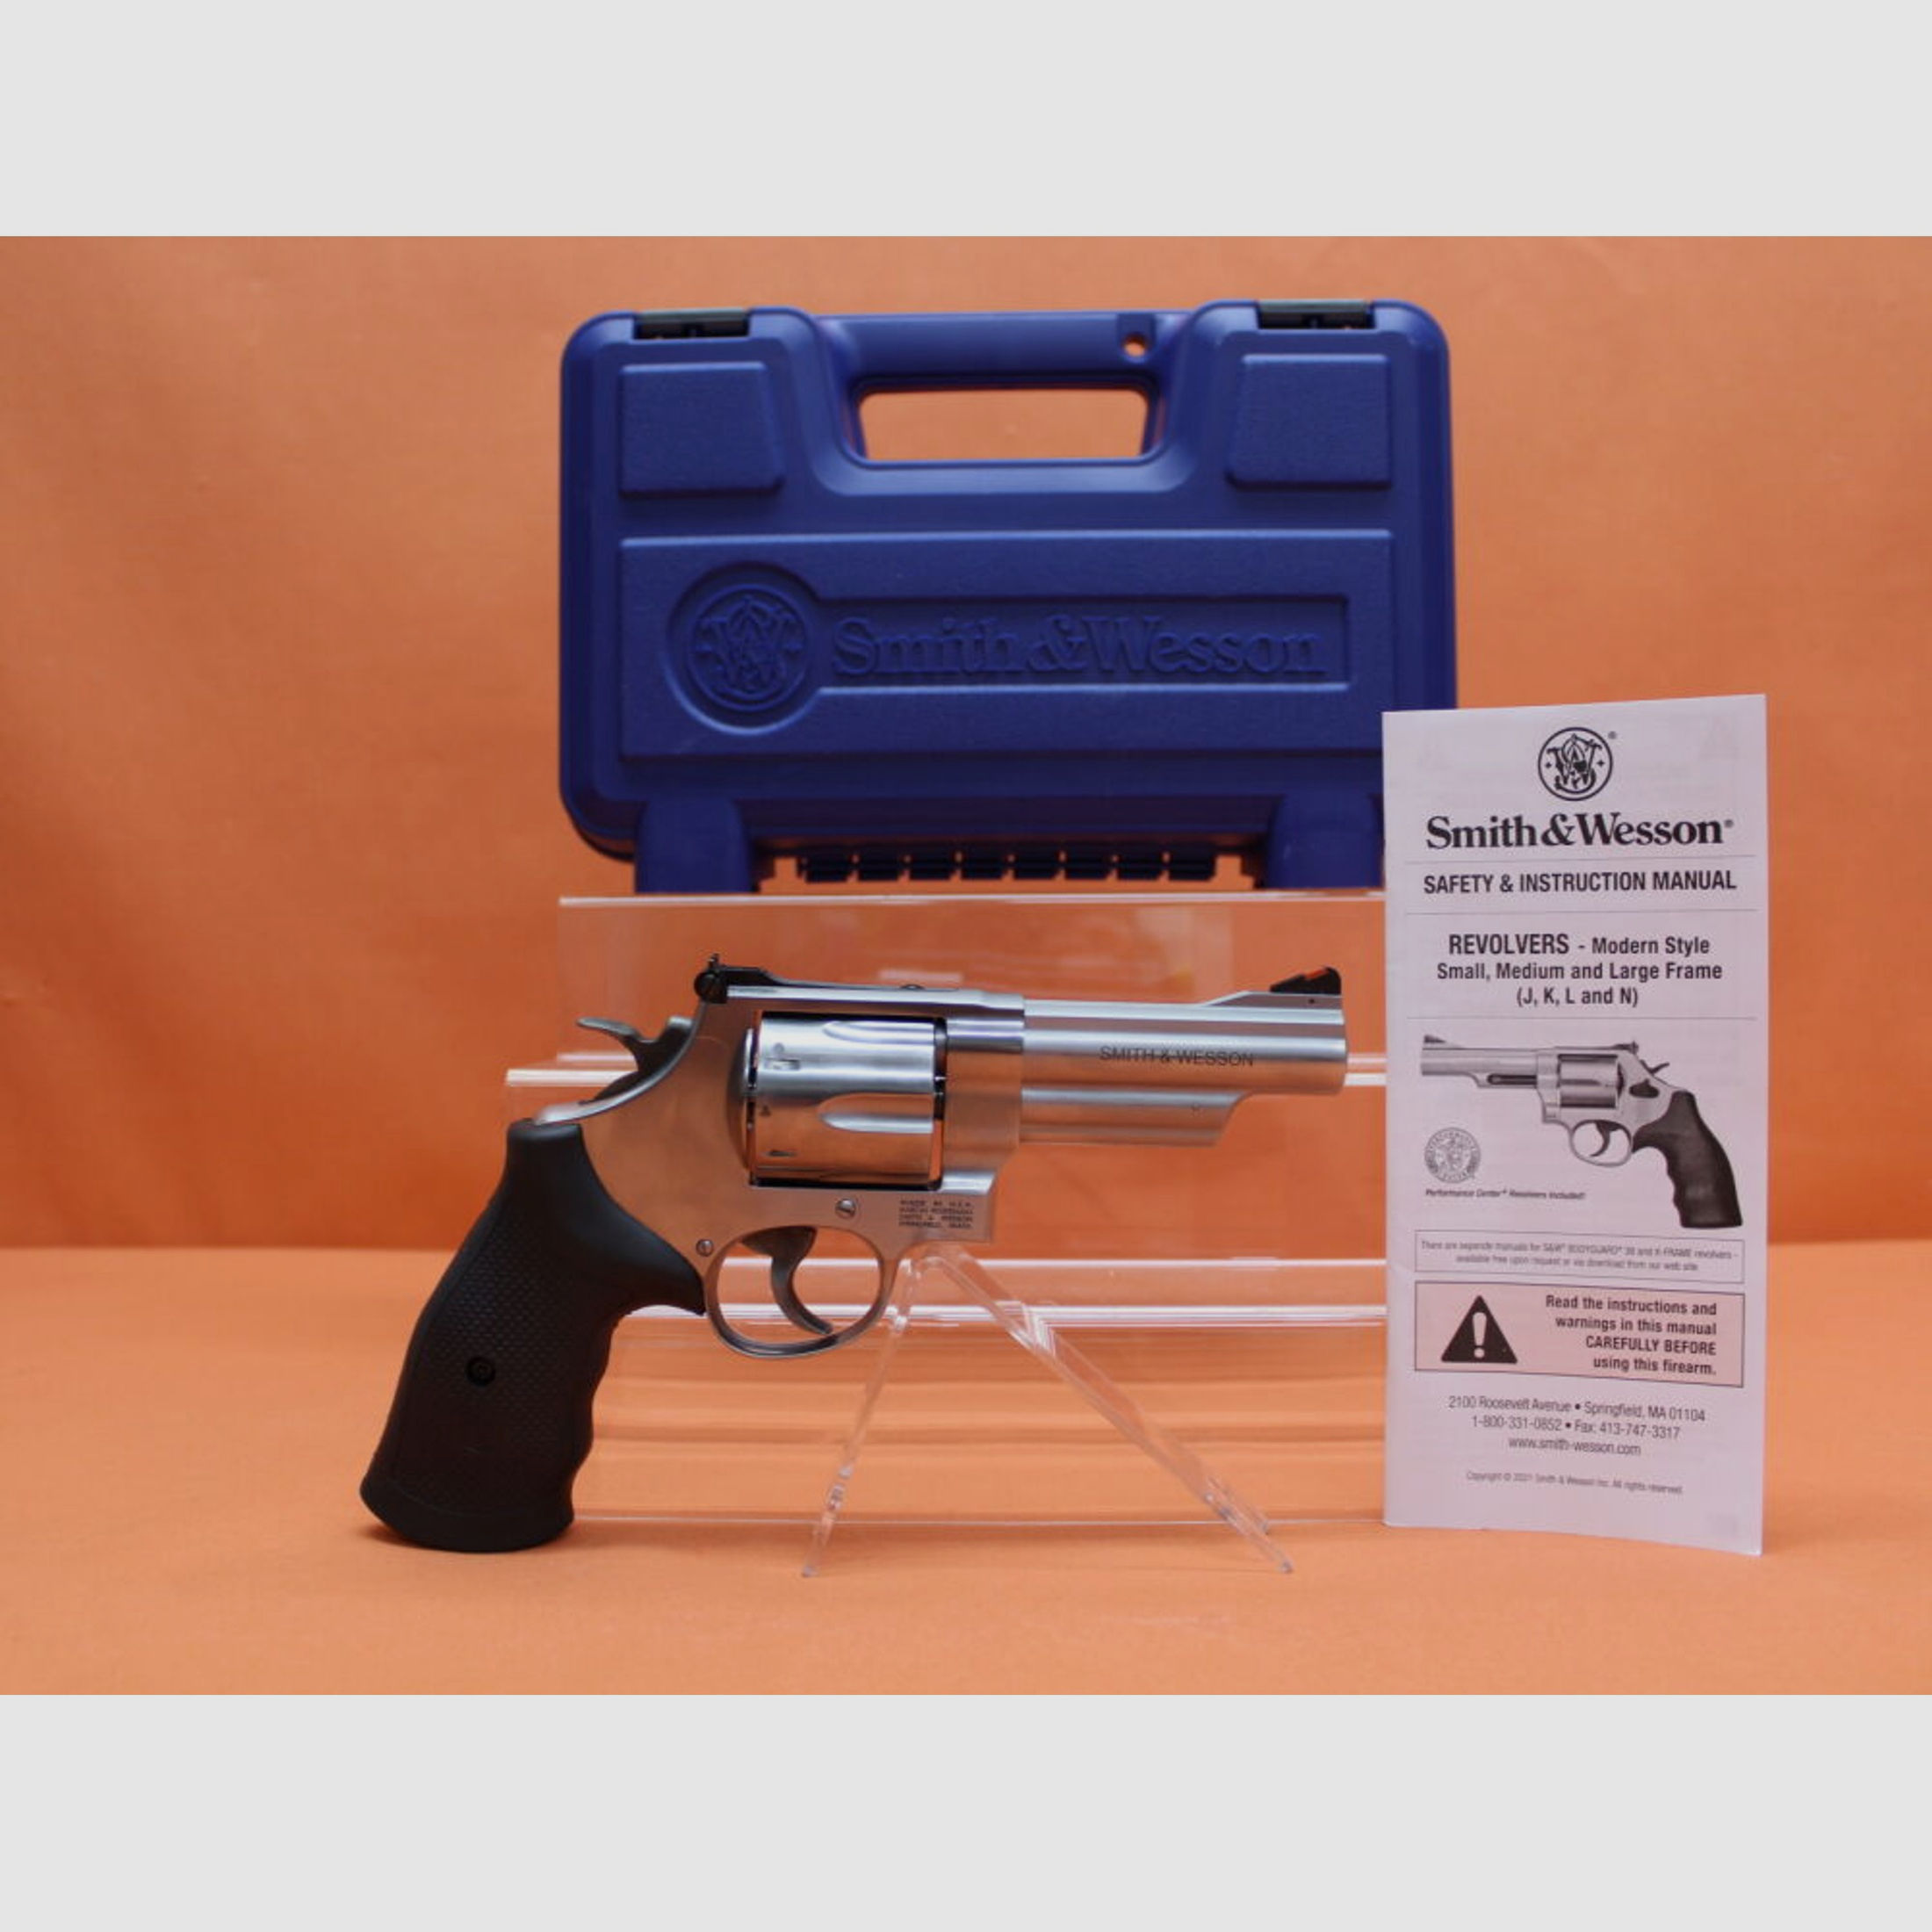 Smith & Wesson/S&W	 Revolver .44RemMagnum Smith&Wesson/ S&W629-6 Stainless, 4" Lauf/ Mikrometervisier/ Gummigriff